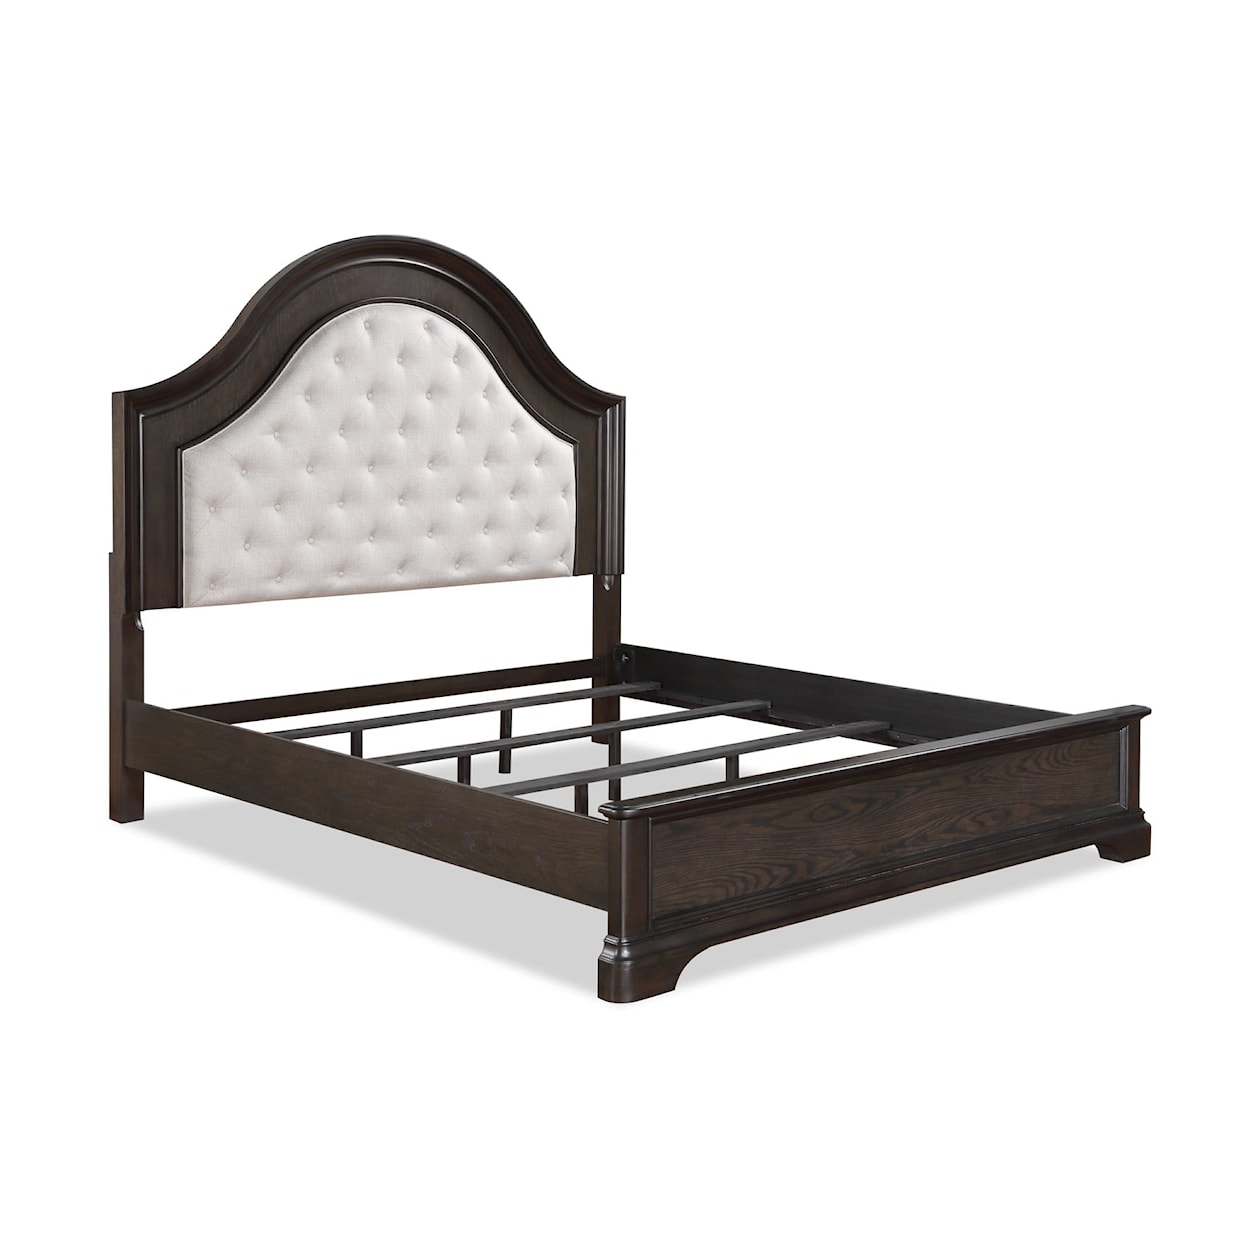 CM Duke Queen Arched Panel Bed